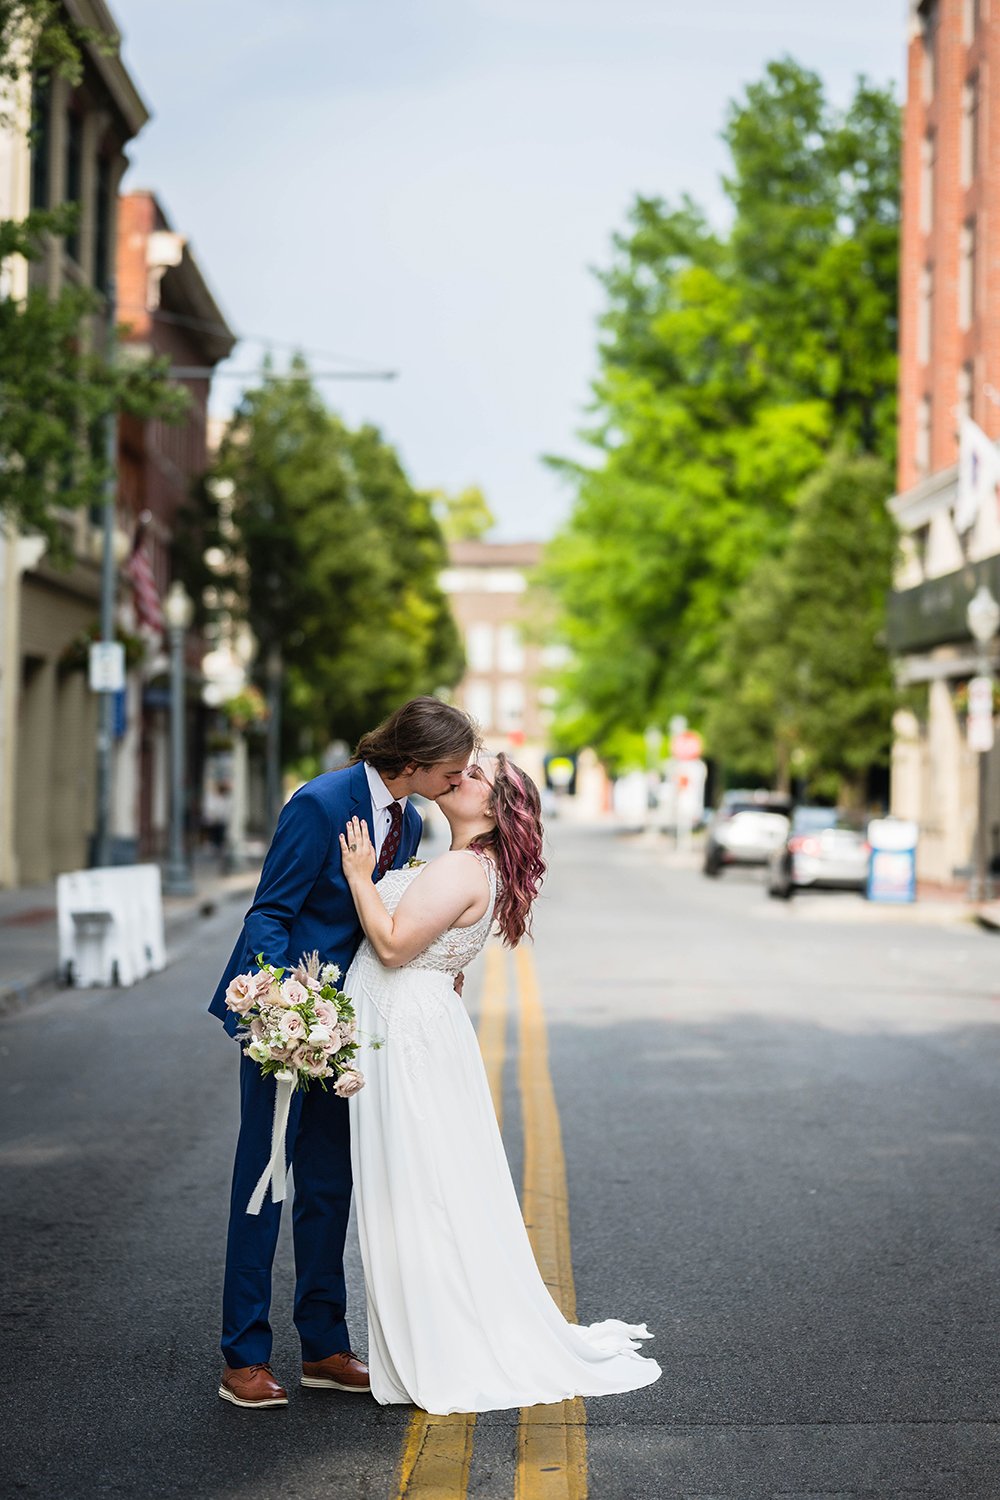 A wedding couple on their elopement day embrace and kiss in the middle of the street in Downtown Roanoke in June.